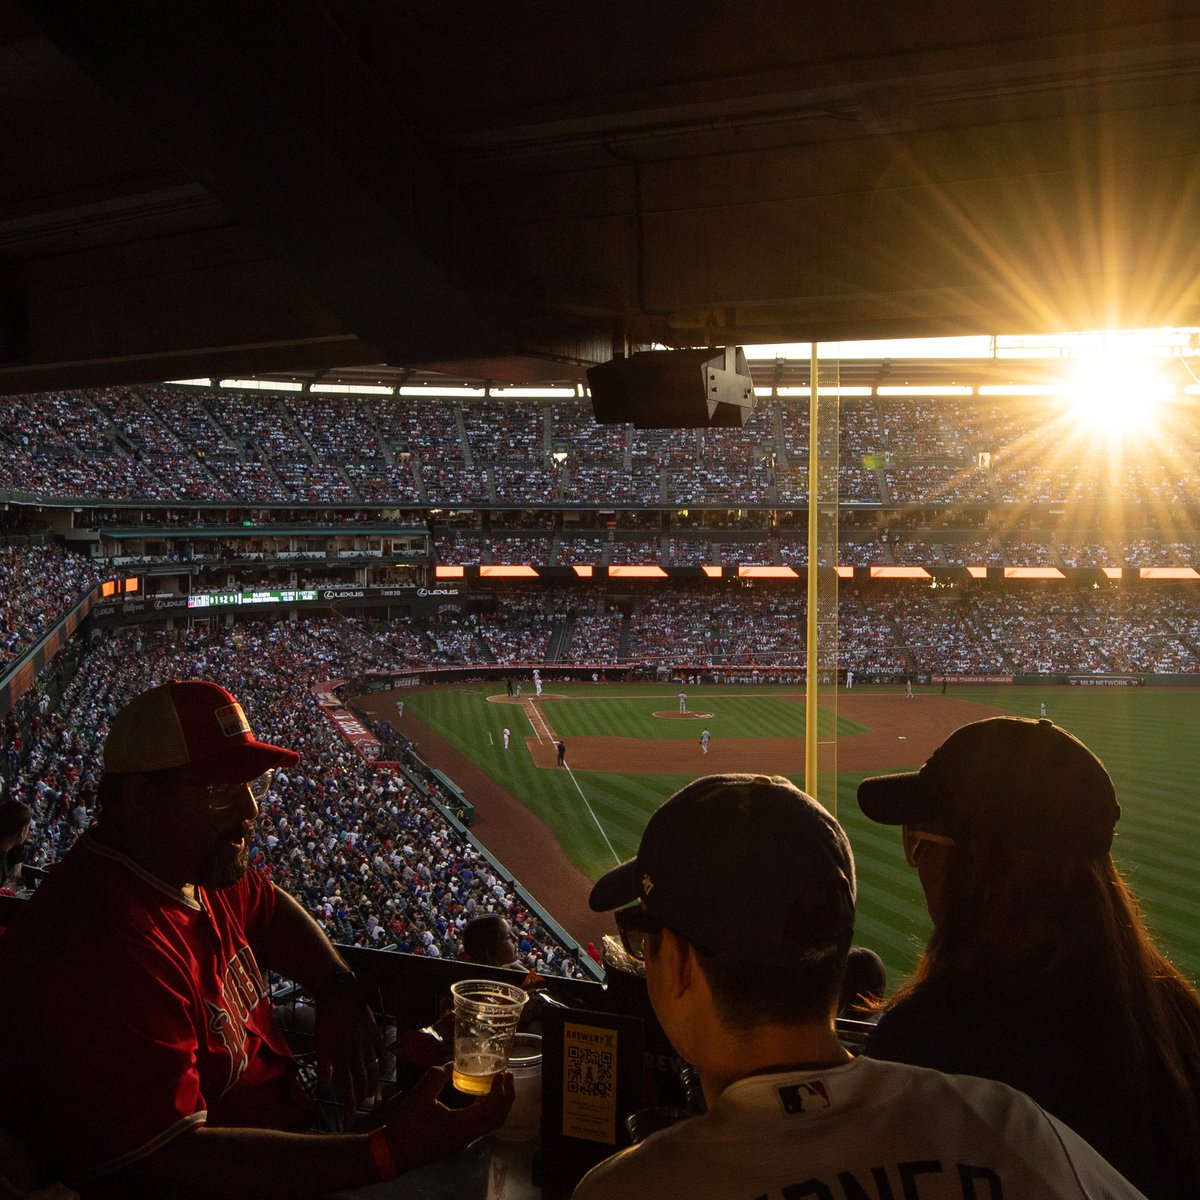 Coming to tonight's game? ⚾️ We're expecting a sold out crowd! Carpool to Angel Stadium with your group, as parking will be limited. Be sure to give yourself plenty of time to enter the ballpark to enjoy every second of the action!